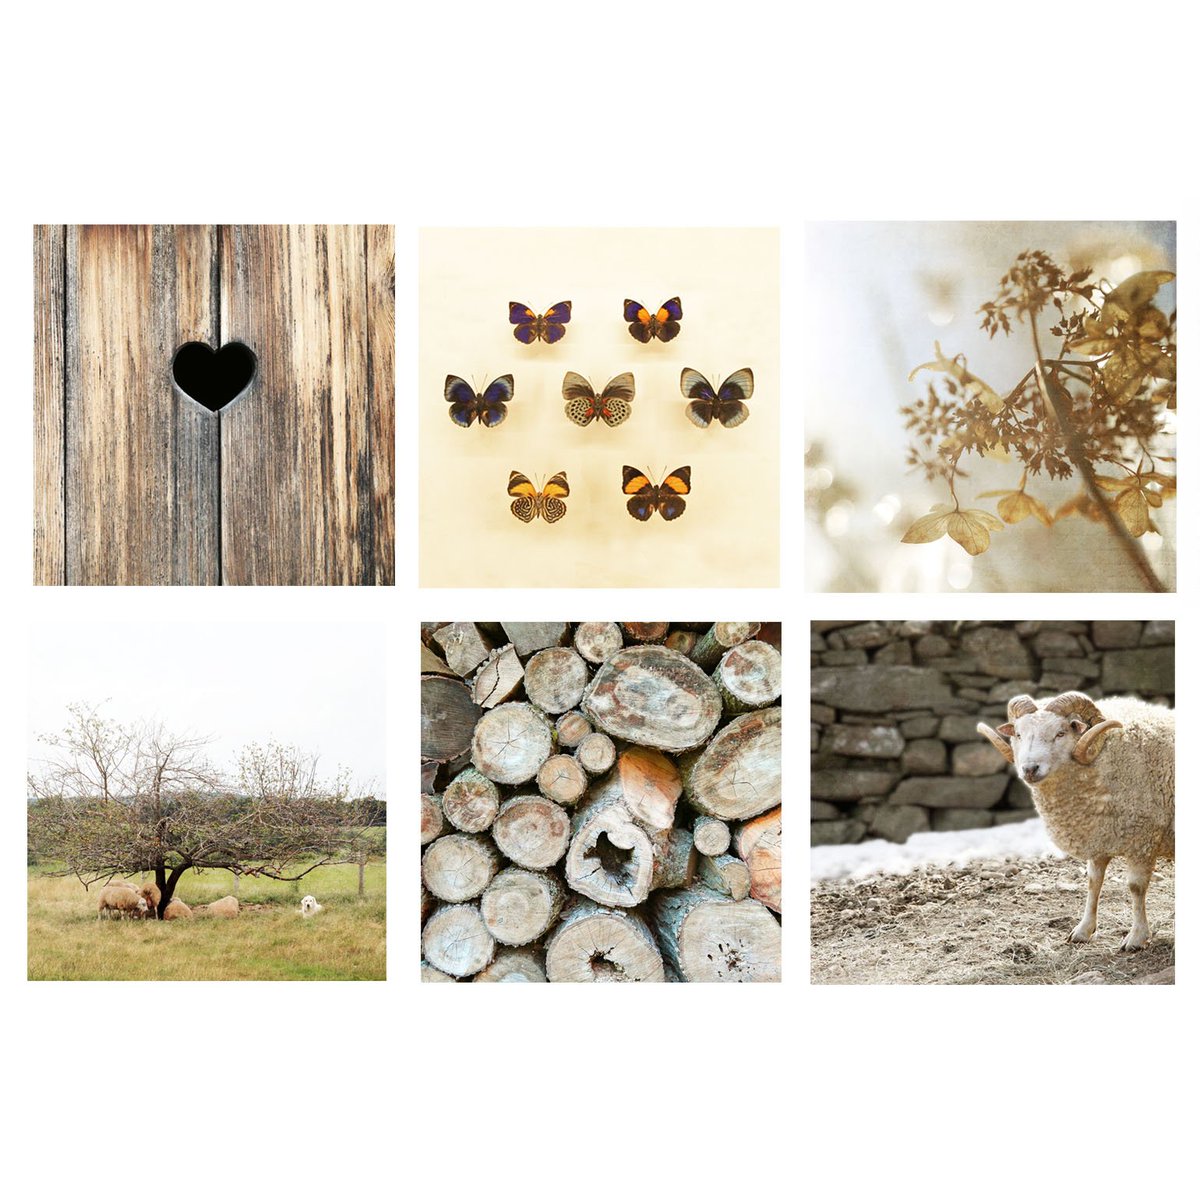 New! Set of six photos etsy.me/2weFcwP #farmhouseart #countrywallart #interiorstyling #rusticfarmhouse #countrylife #decorating